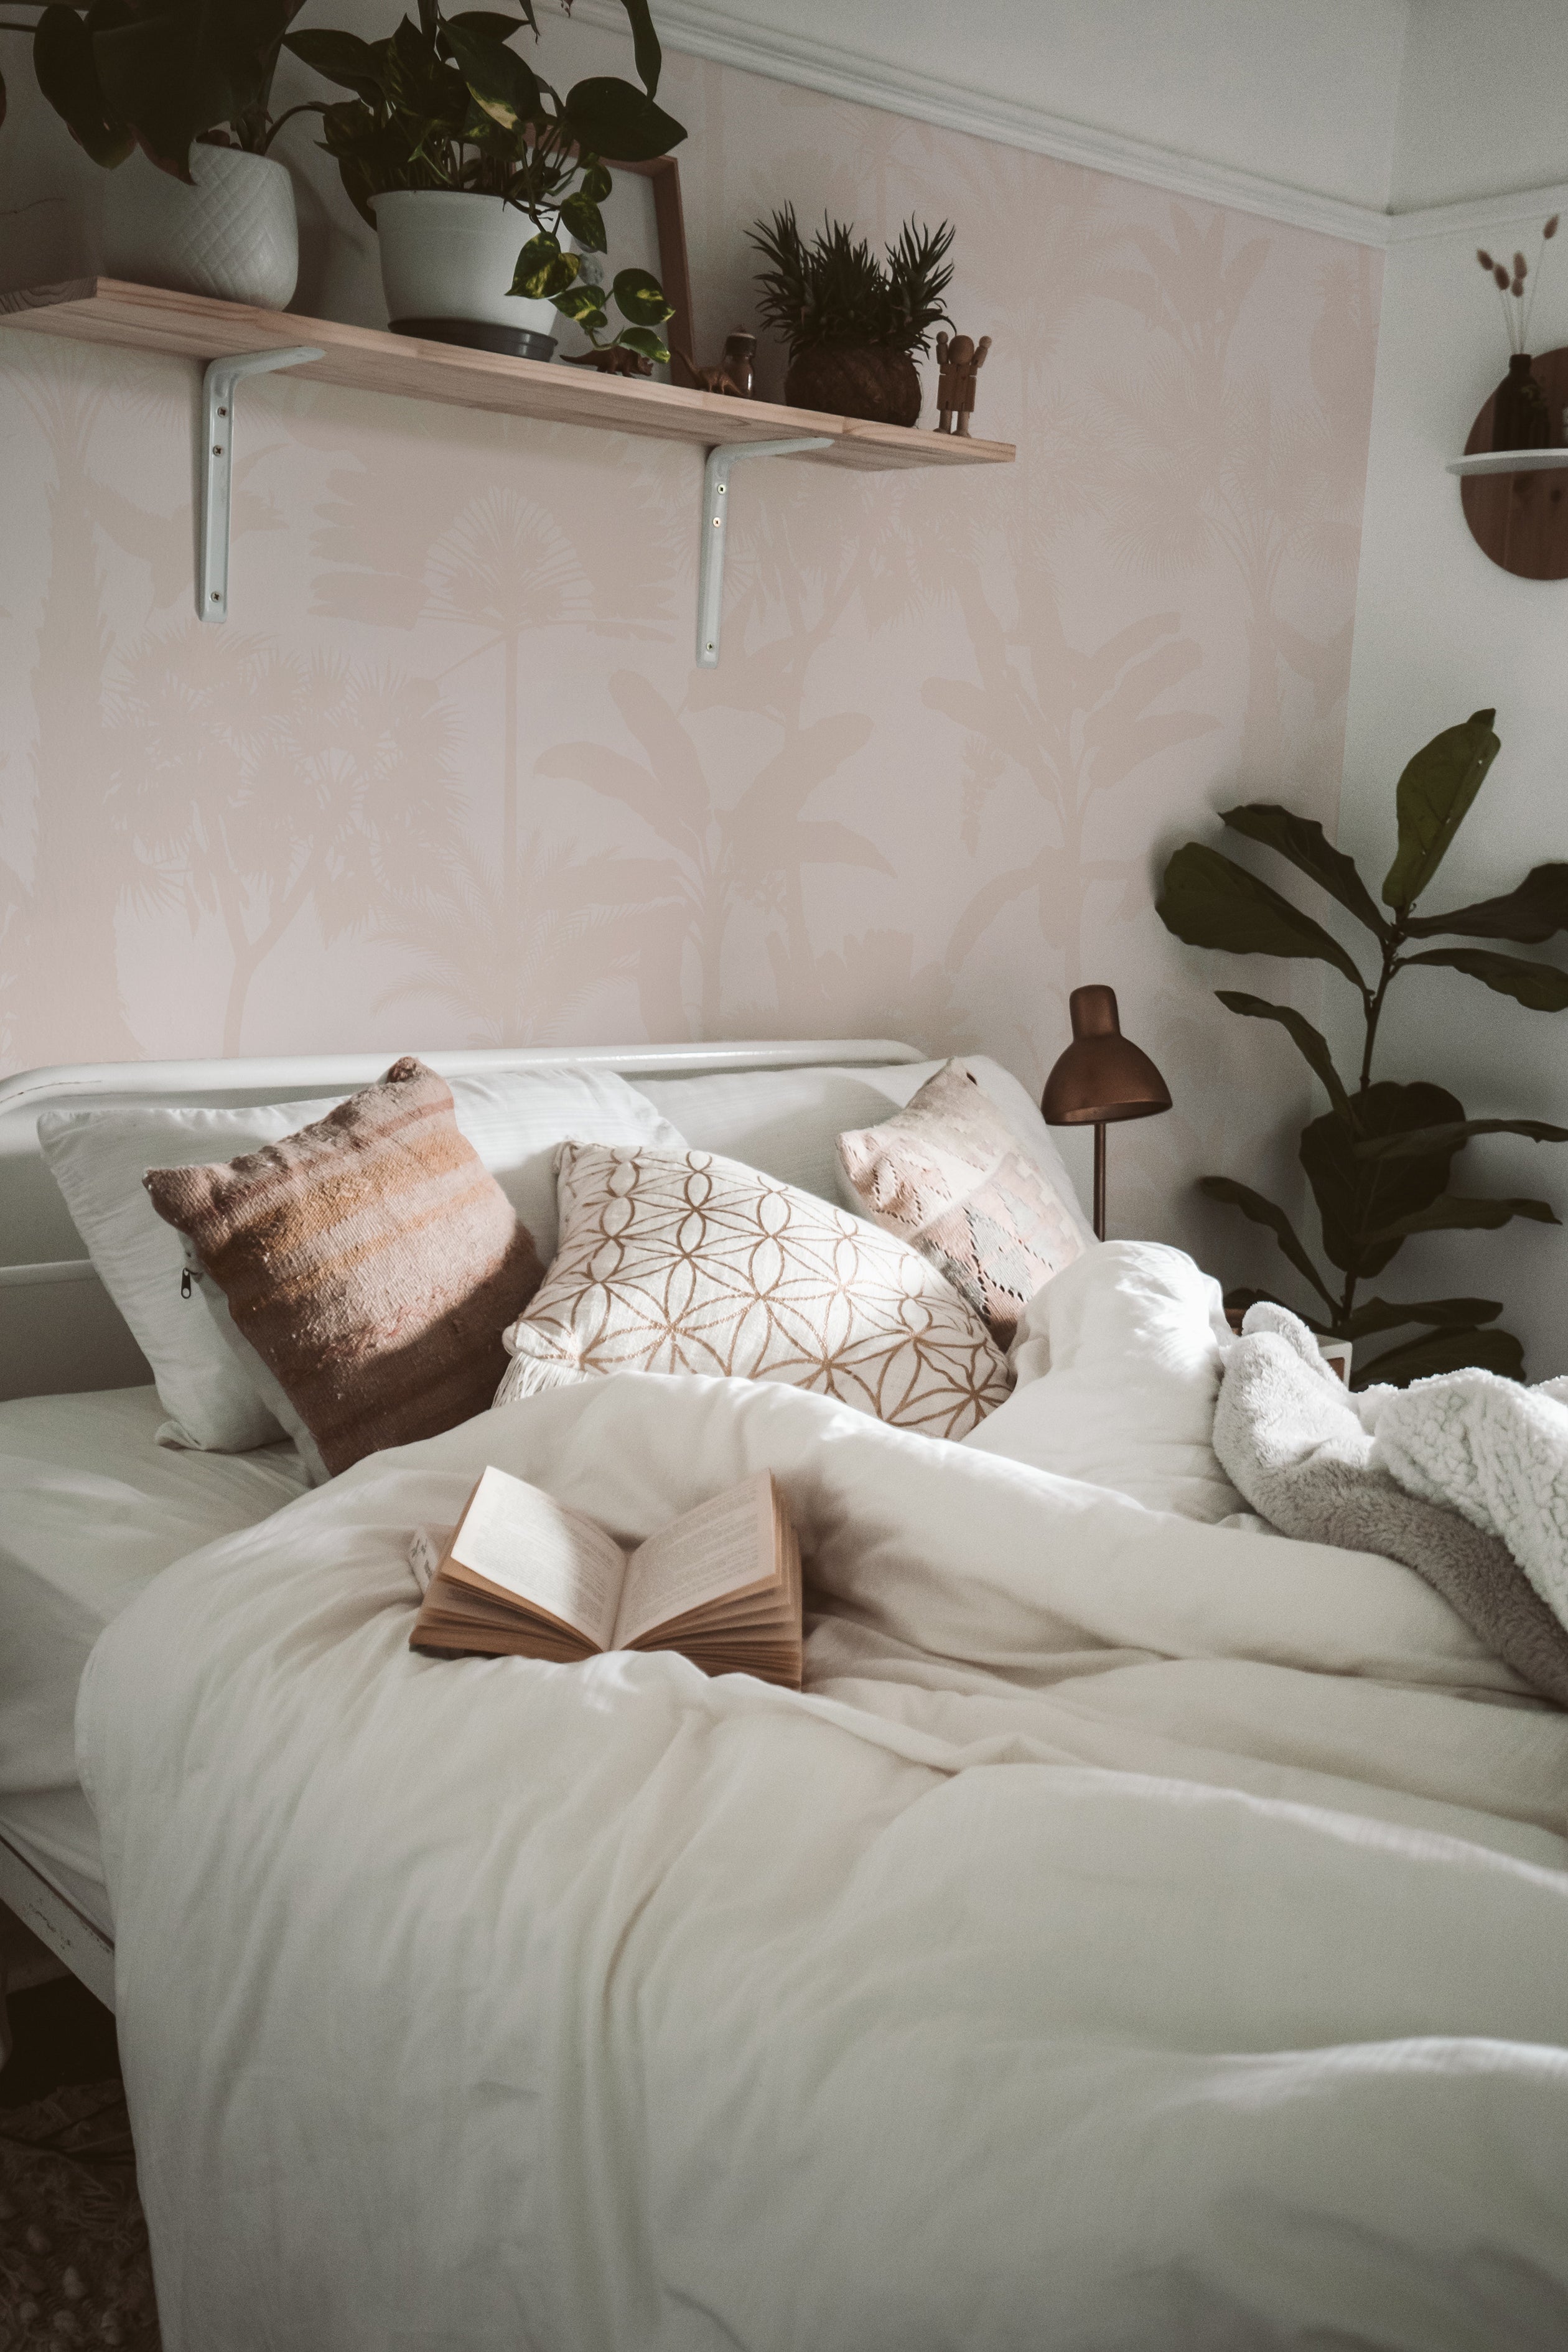 A bedroom enhanced with Exotic Silhouette Wallpaper, displaying a soothing arrangement of white tropical plant silhouettes against a light pink background. The wallpaper adds a gentle, relaxing touch to the space, complemented by earth-toned bedding and natural wood accents